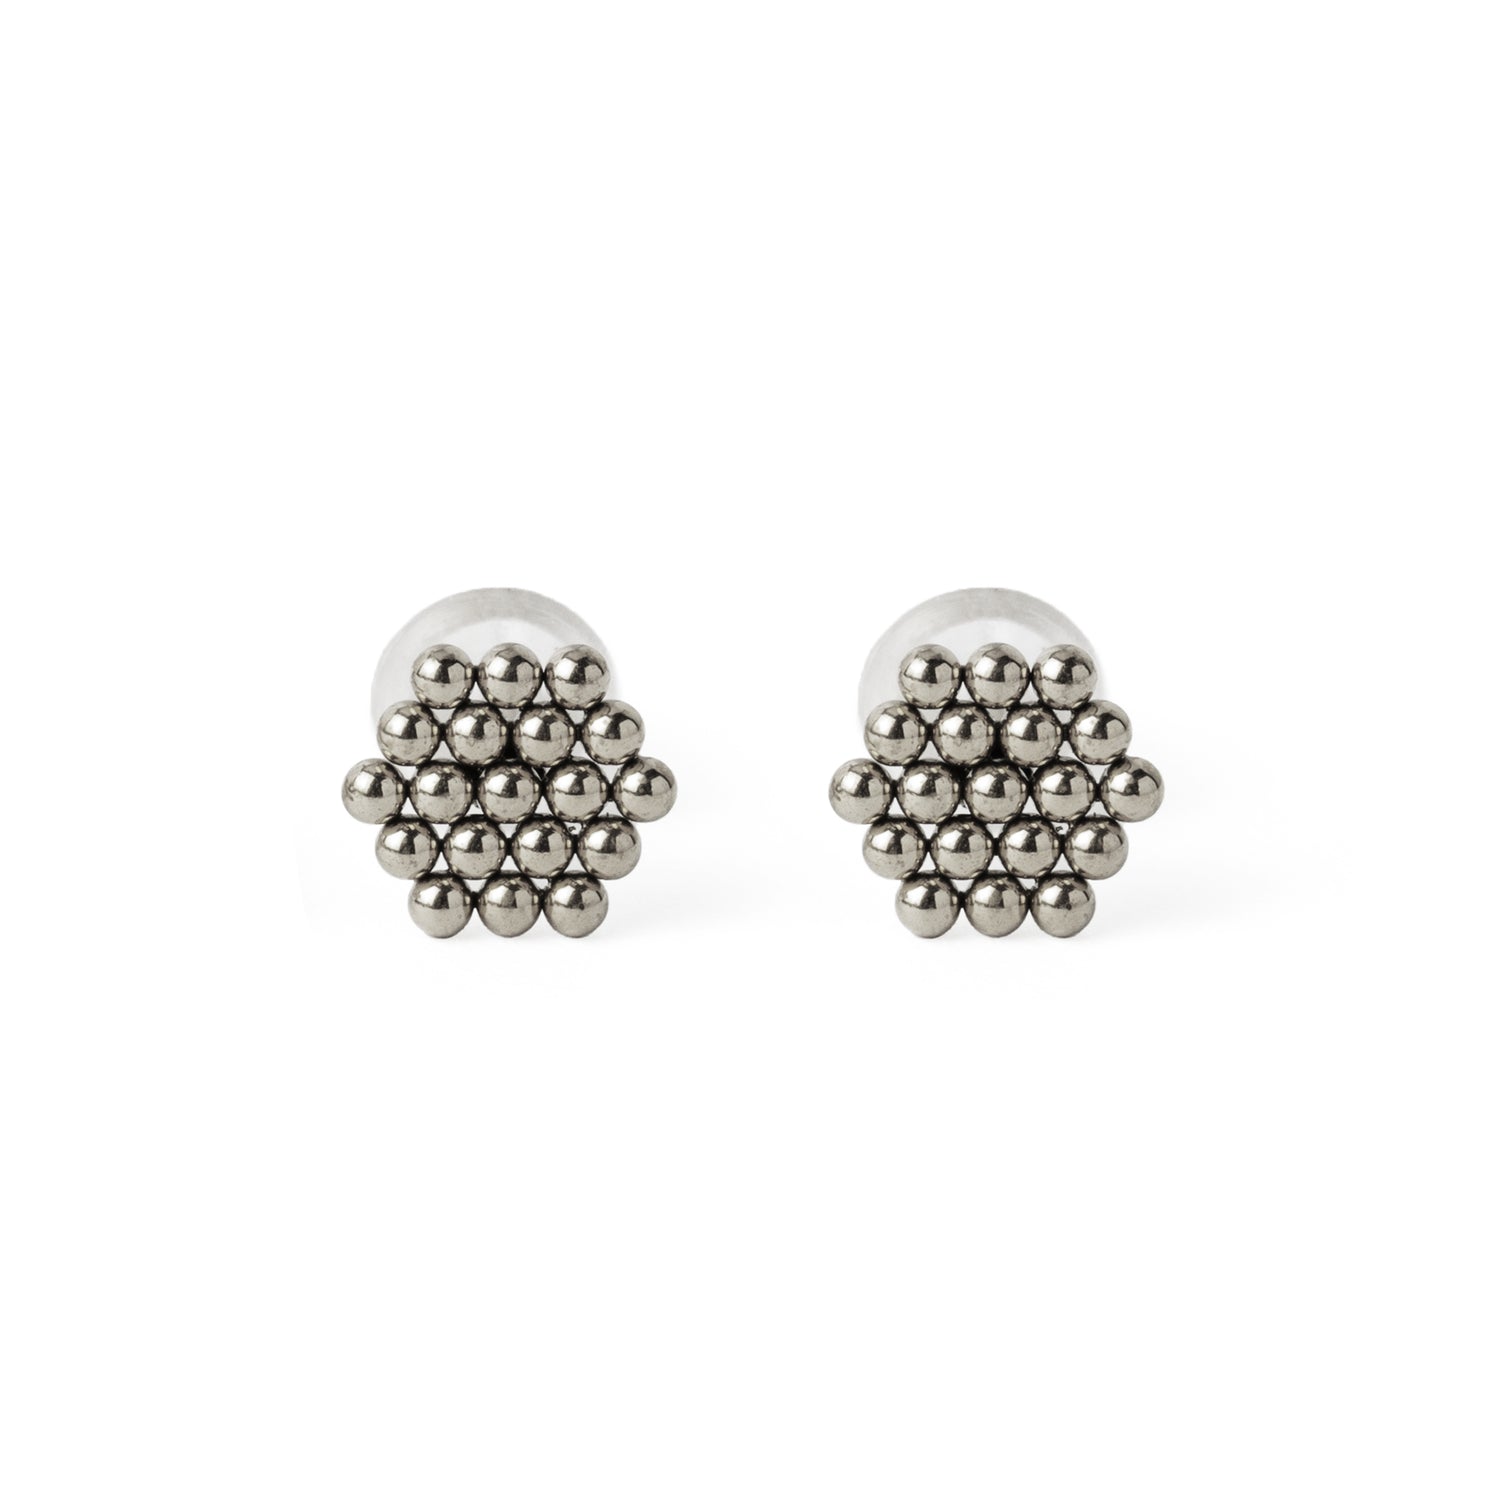 Dotted Hexagon Ear Studs frontal view